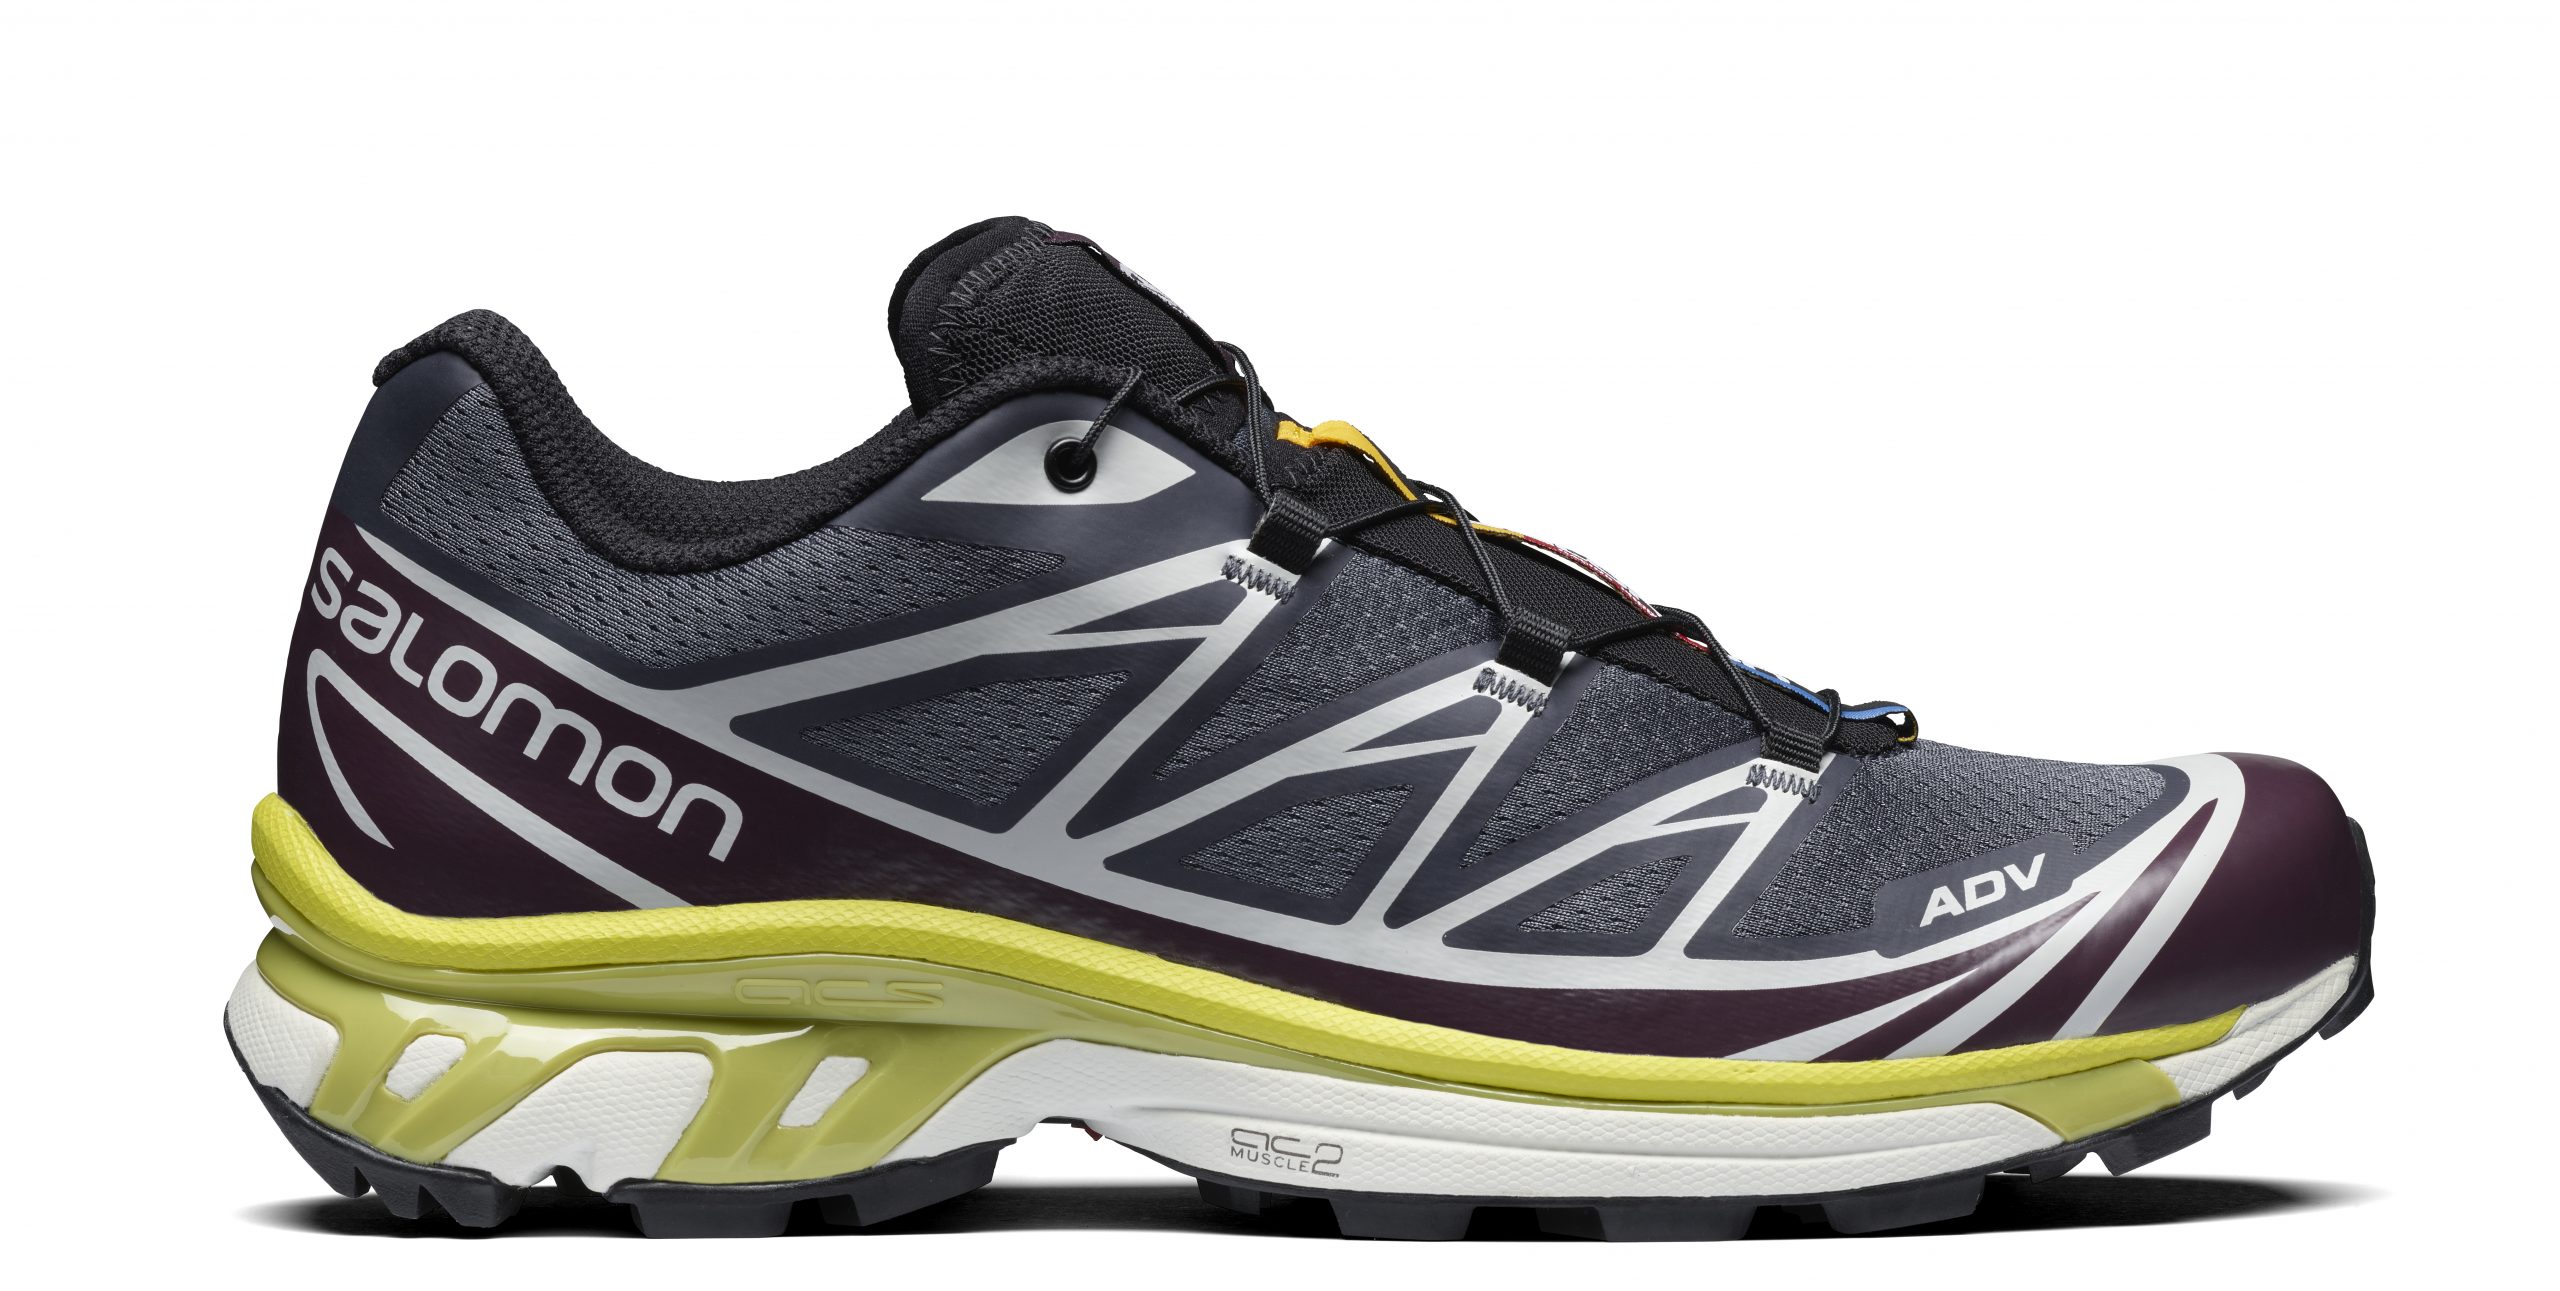 Why these trail running shoes are runway fashion - iheartrunning blog